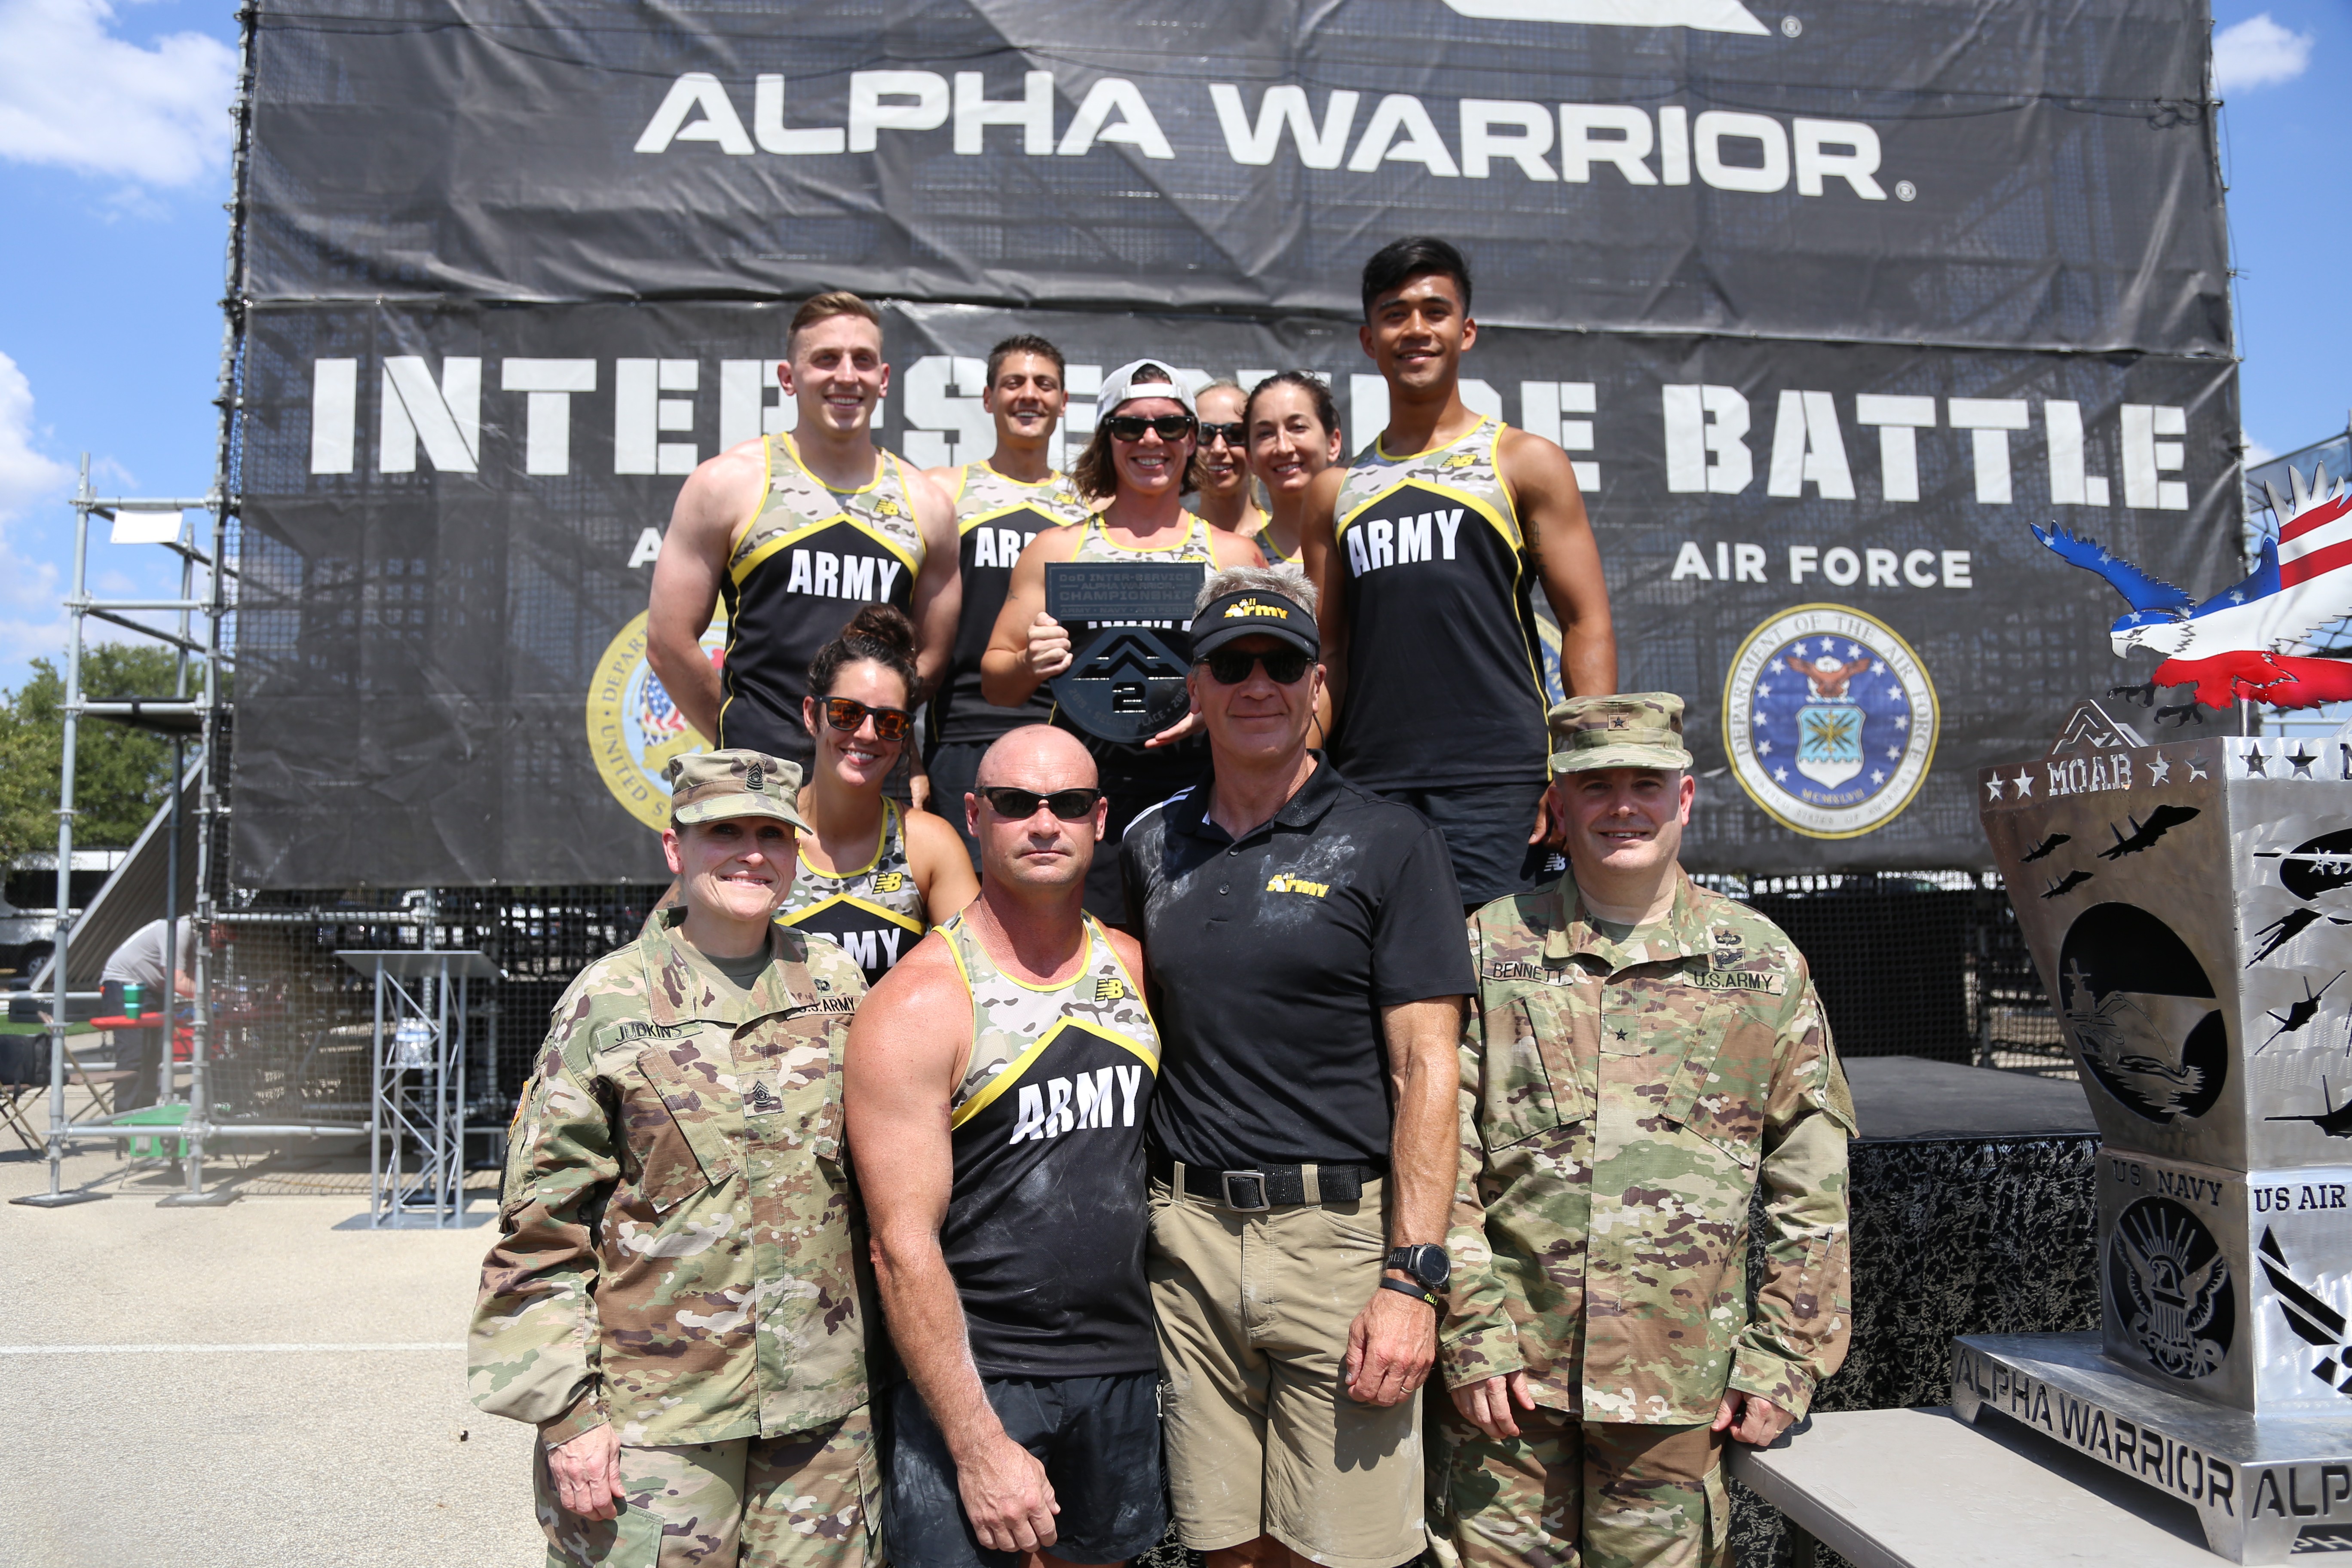 Inaugural All-Army Alpha Warrior team wins second place at inter